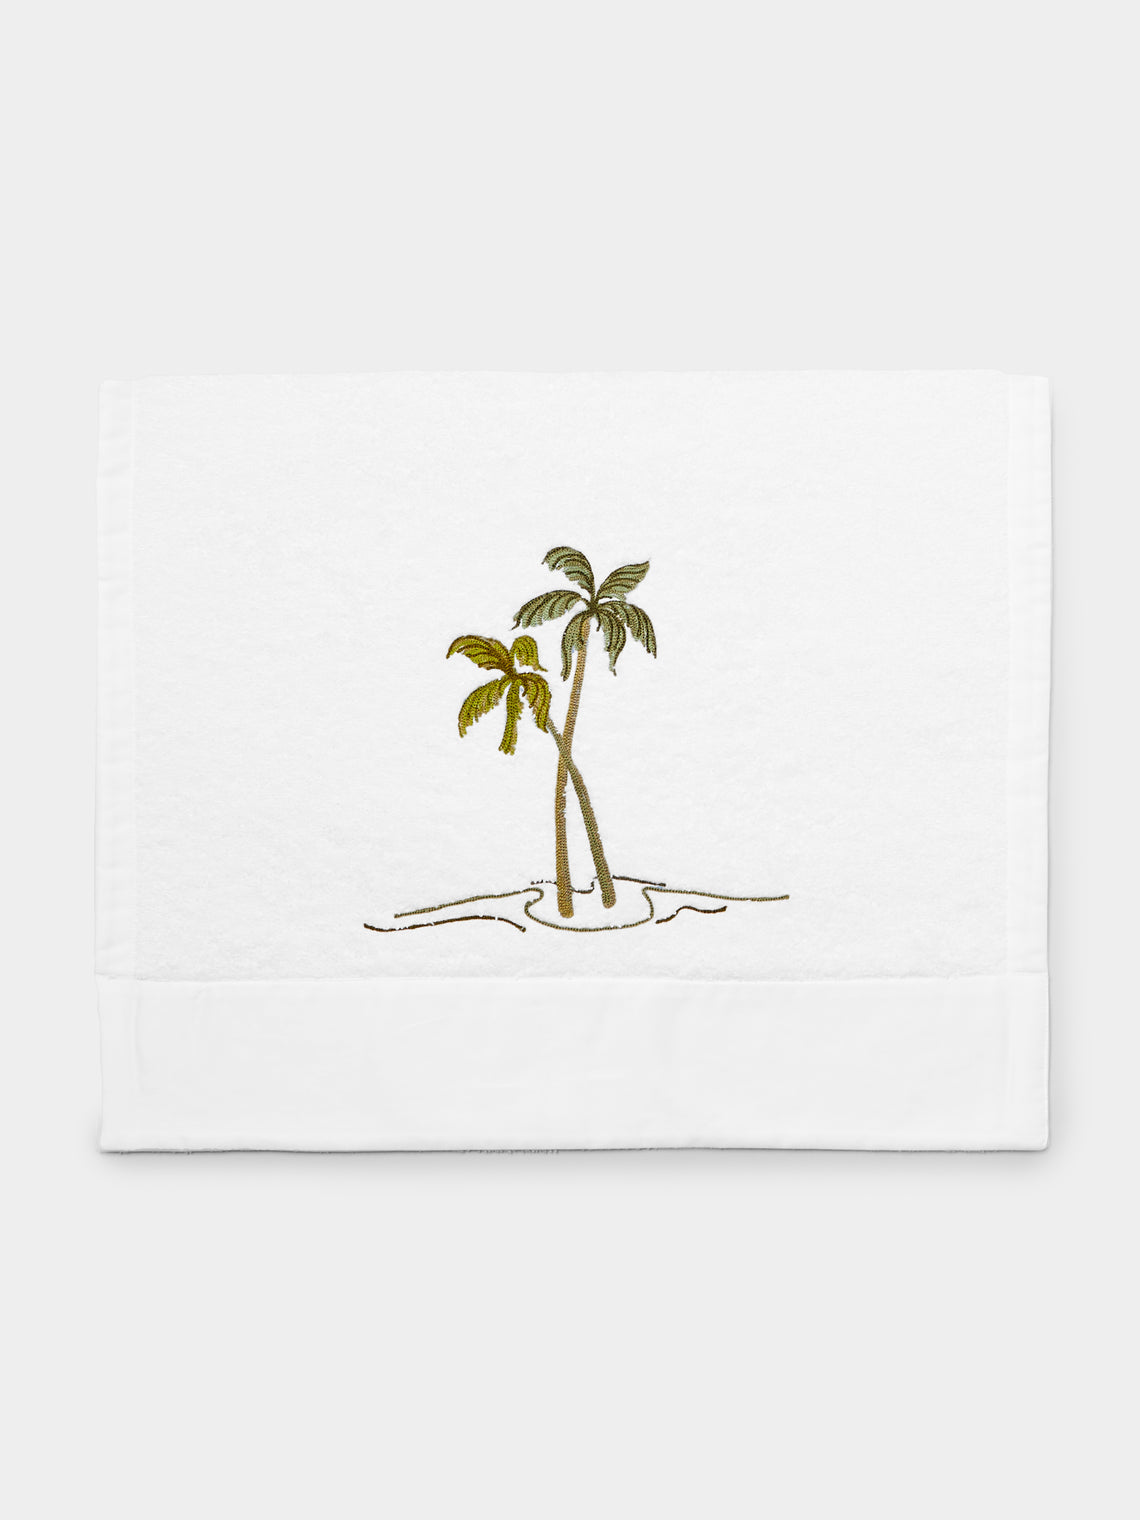 Loretta Caponi - Palm Tree Hand-Embroidered Cotton Hand Towel -  - ABASK - 